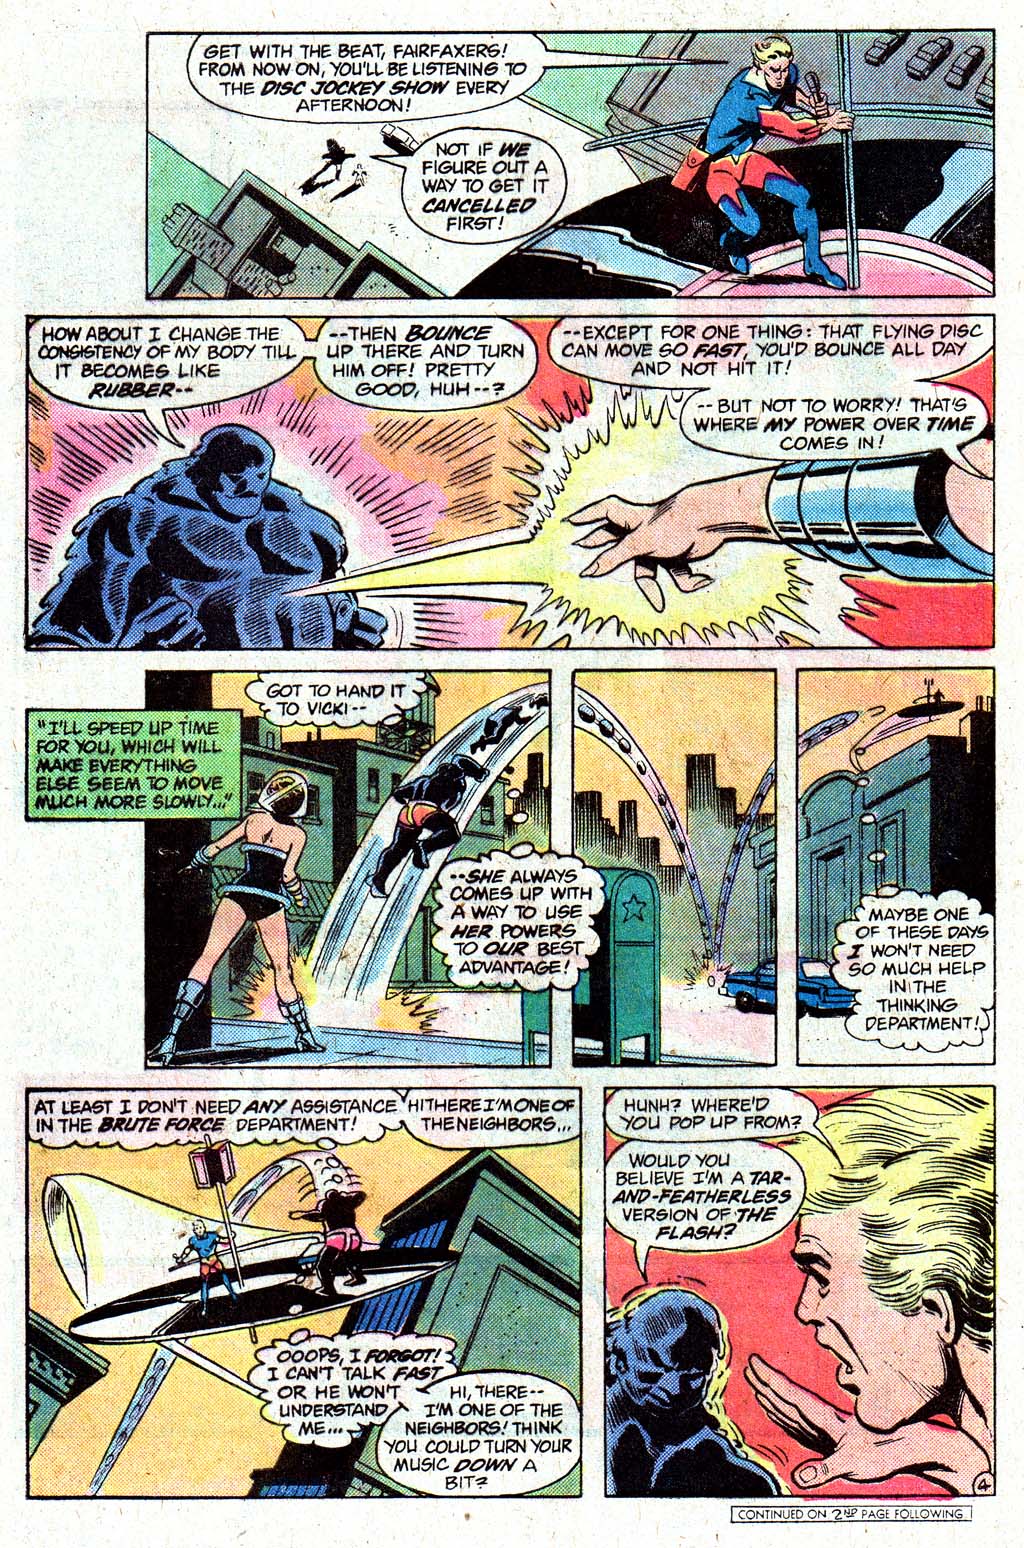 The New Adventures of Superboy 29 Page 27